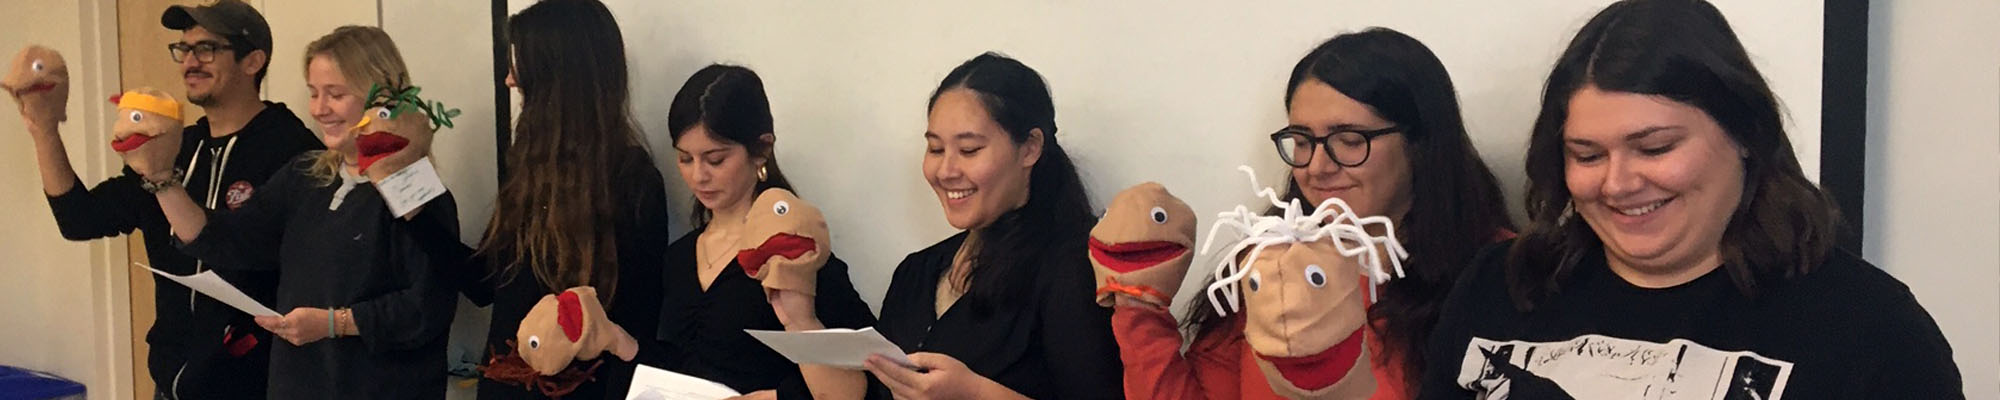 students in a class with puppets